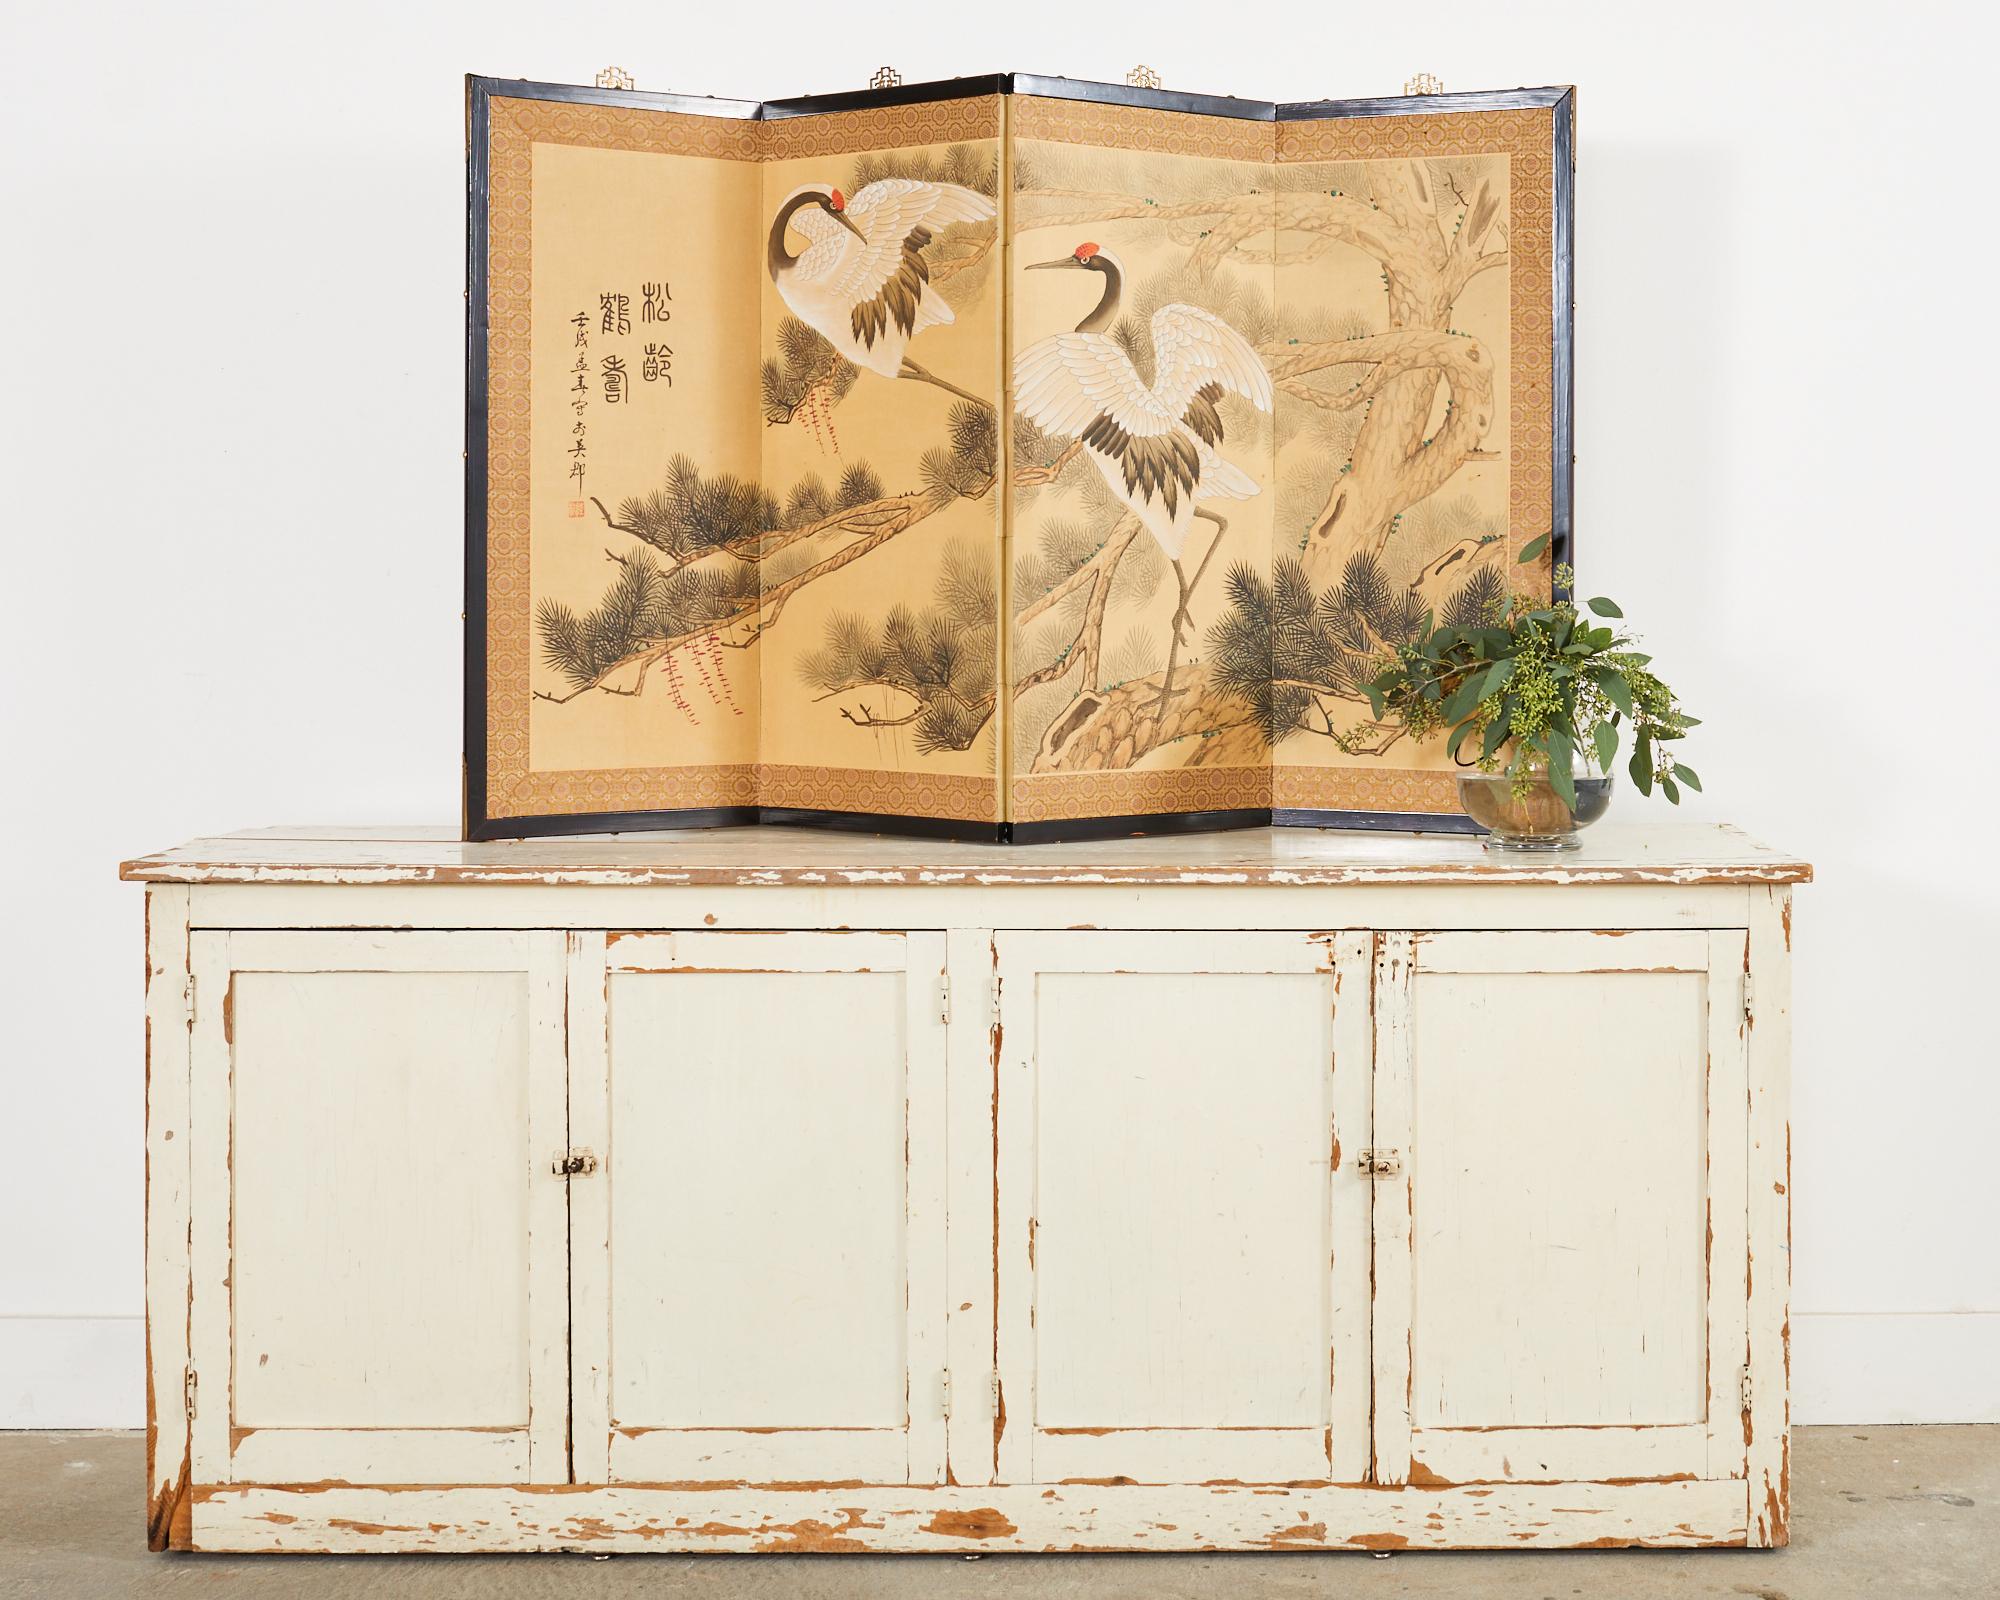 Captivating 20th century Japanese style byobu four-panel folding screen. The screen is titled ancient pine/longevity cranes signed on left side with an artist seal Ying Jun. The screen depicts two white Manchurian cranes in an ancient pine with a